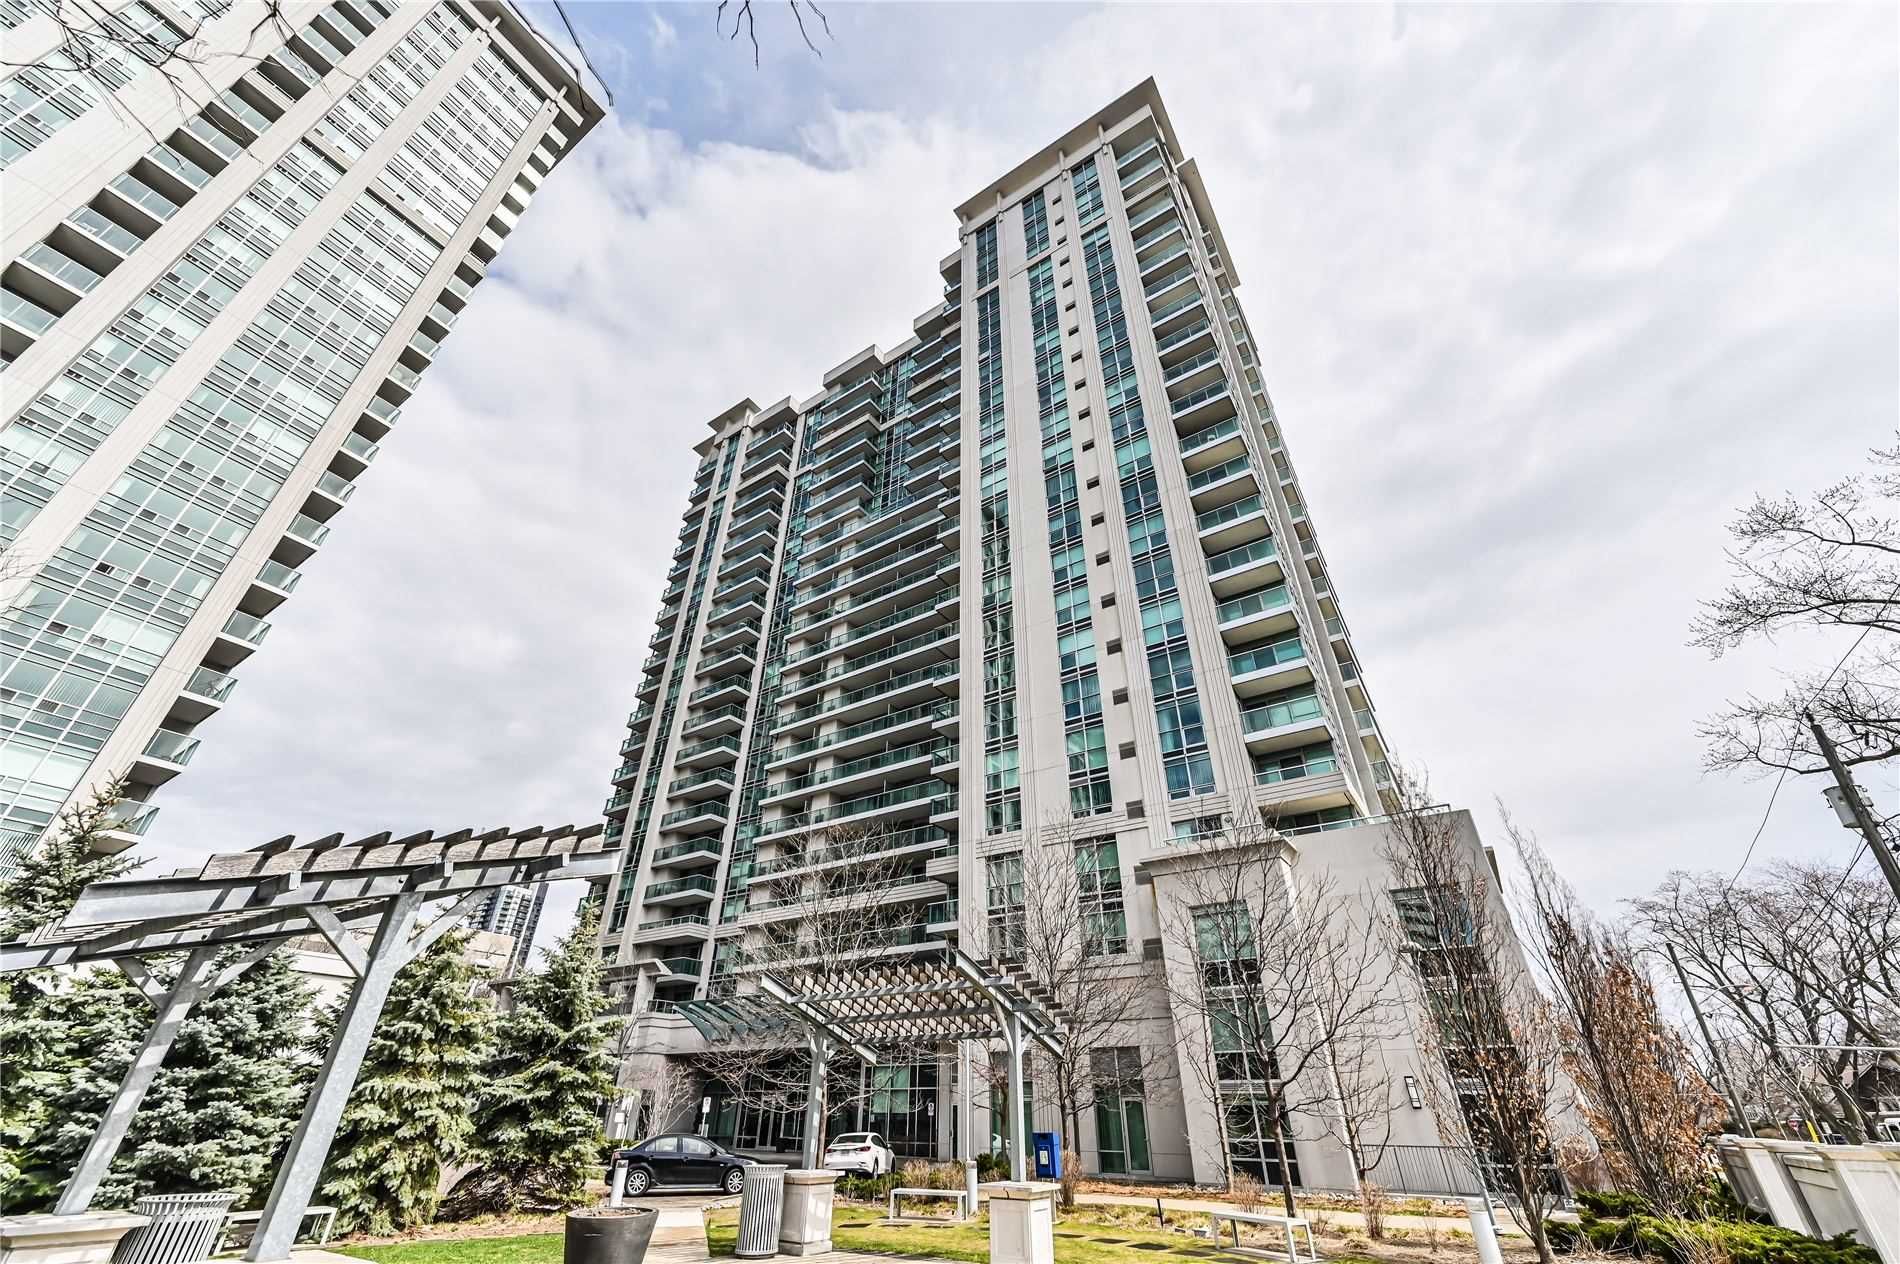 17 Anndale Dr. This condo at Savvy Condos is located in  North York, Toronto - image #1 of 3 by Strata.ca